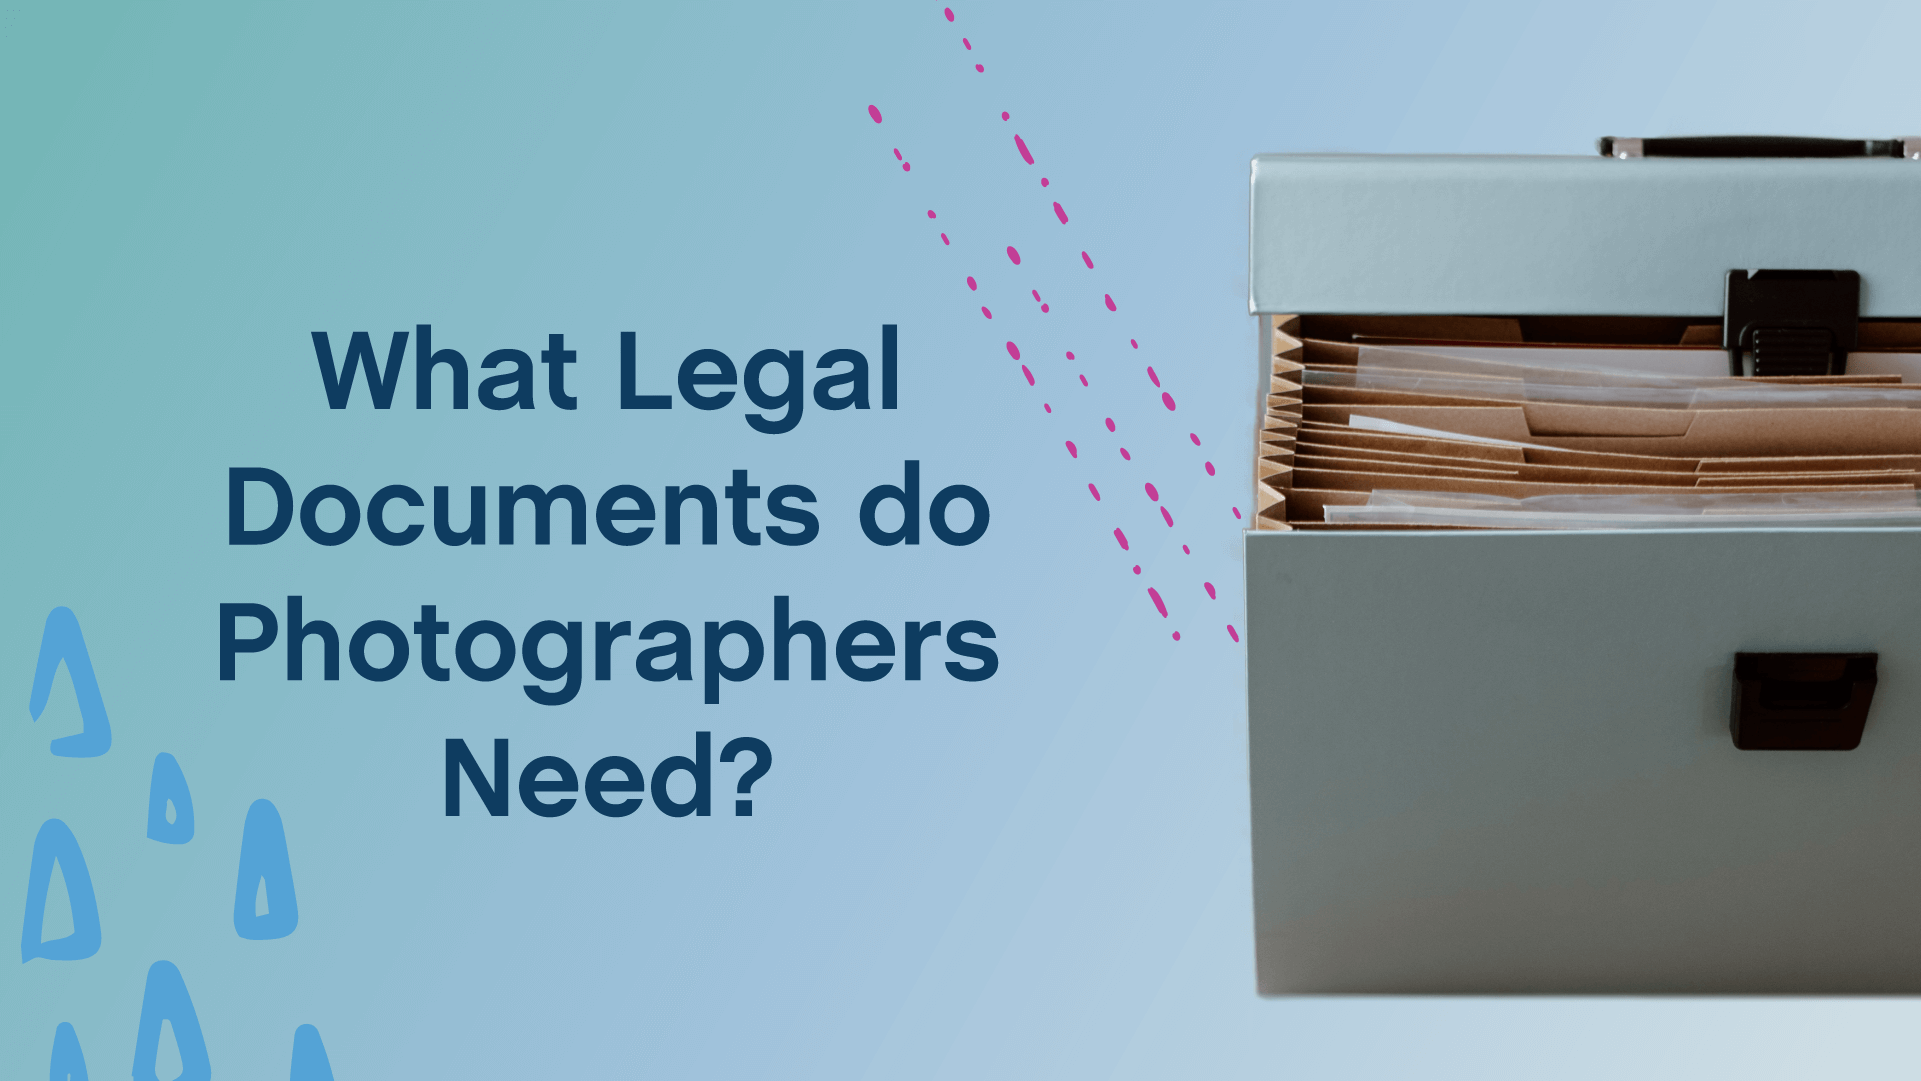 What Legal Documents do Photographers Need?